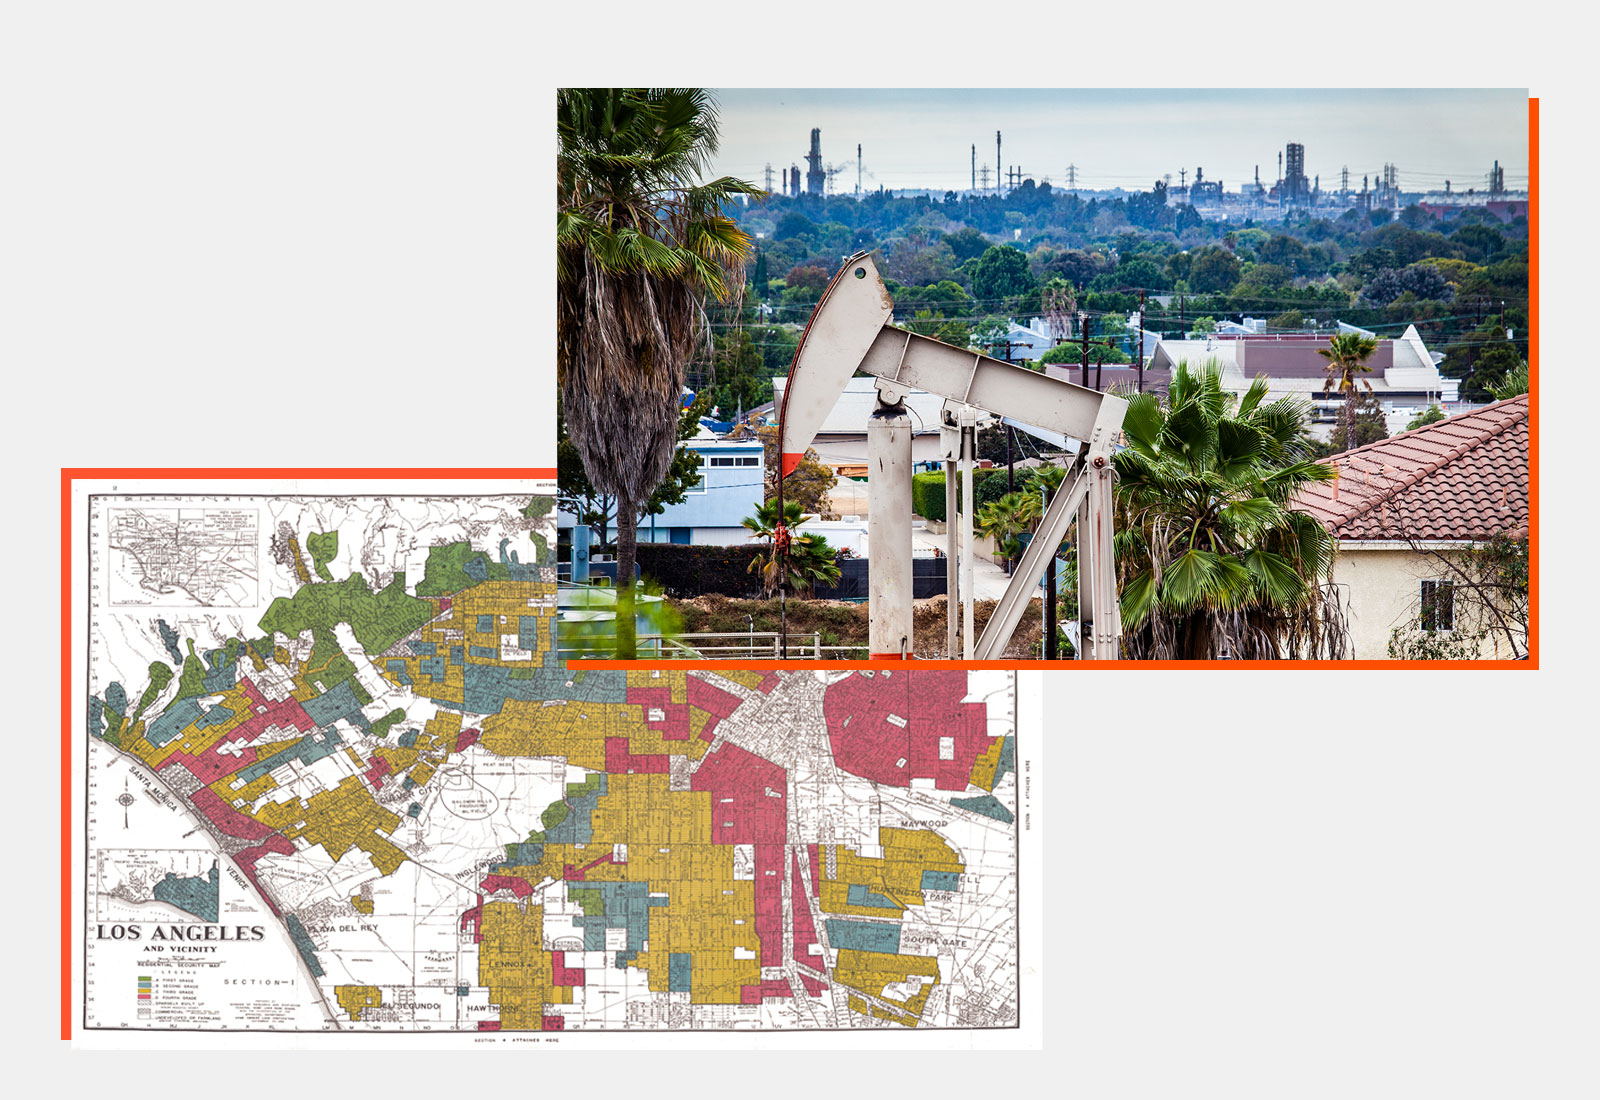 Photo of oil pumpjack in residential area with houses and palm trees overlaid on top of vintage map showing redlined neighborhoods in Los Angeles